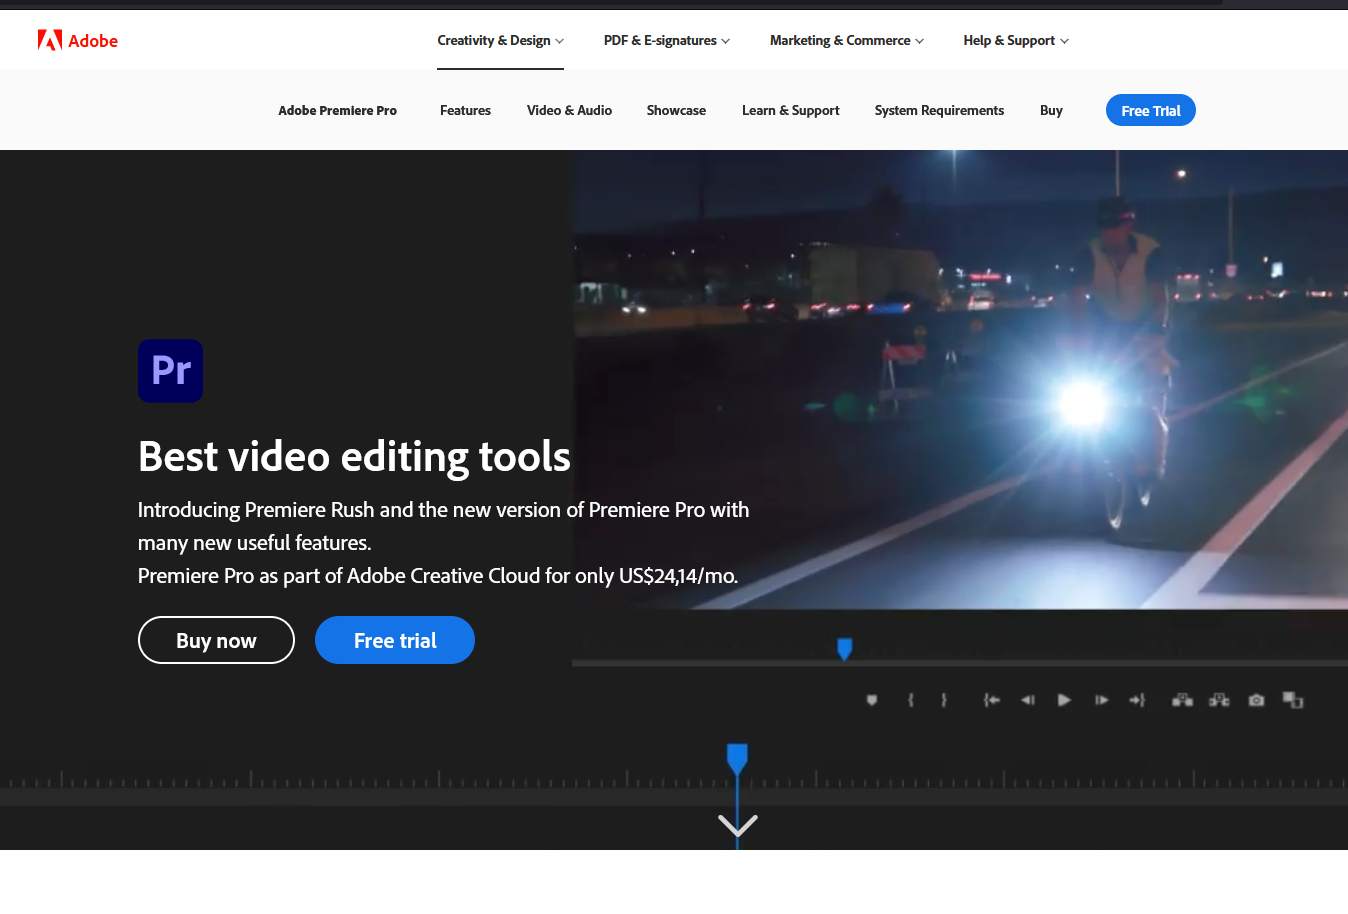 best video editing software for beginners